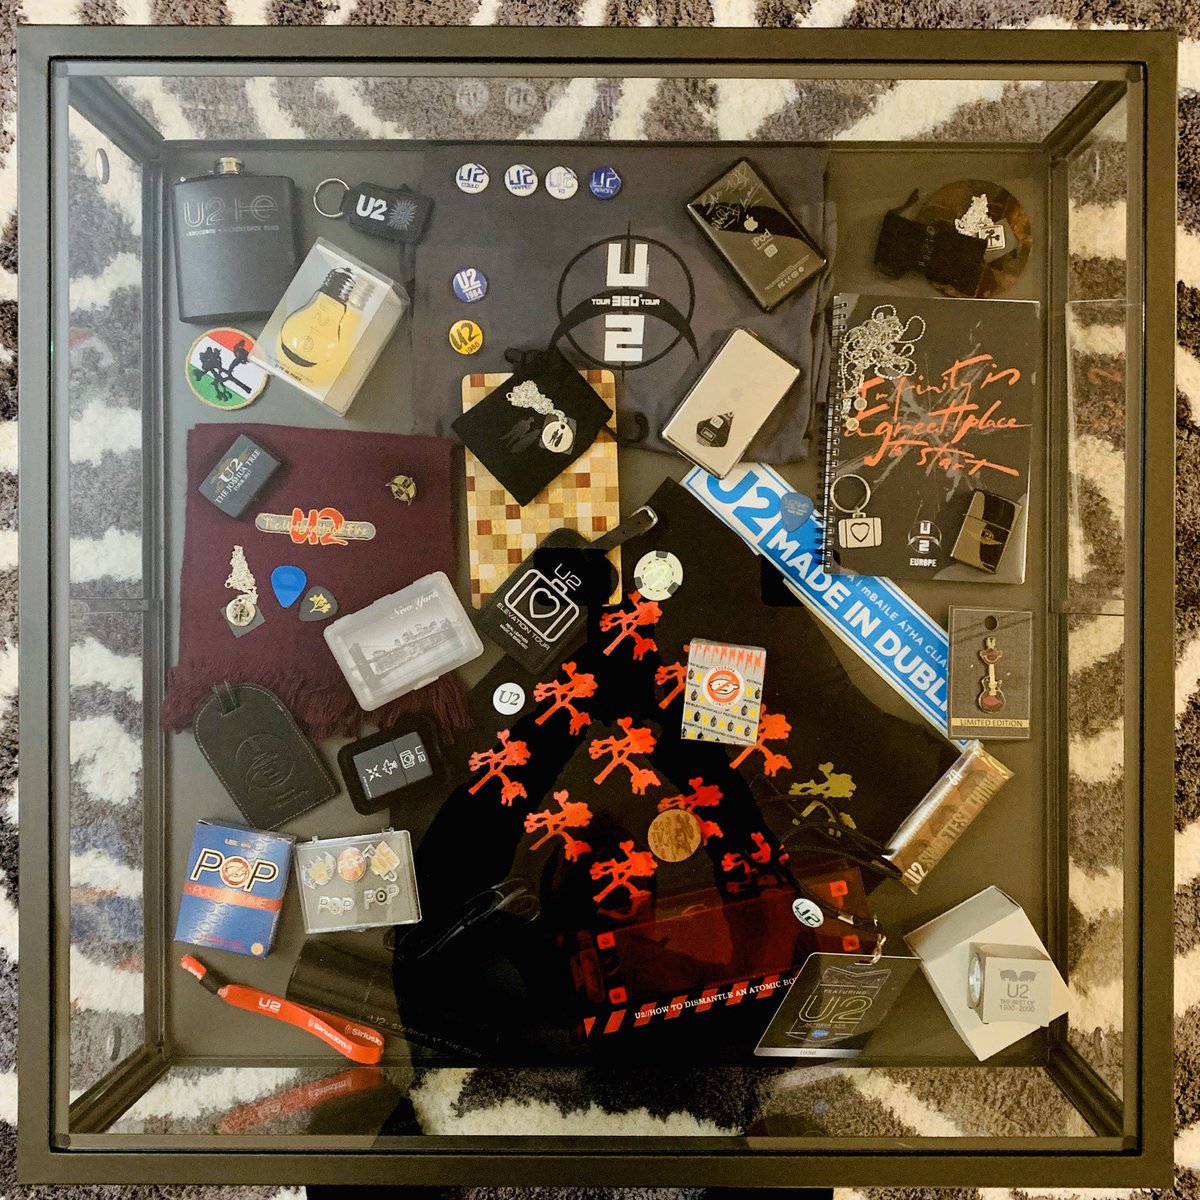 Photo 5: the coffee table: Various pins, lighters, condoms, passes, keychains, weather station, alarm clock, iPods, jewelry, luggage tags, chocolate bar, poker chips, picks and passes. Scarf from TUF tour, T-Shirt from Rose Bowl viewing party, bag from TJT2019 tour etc.